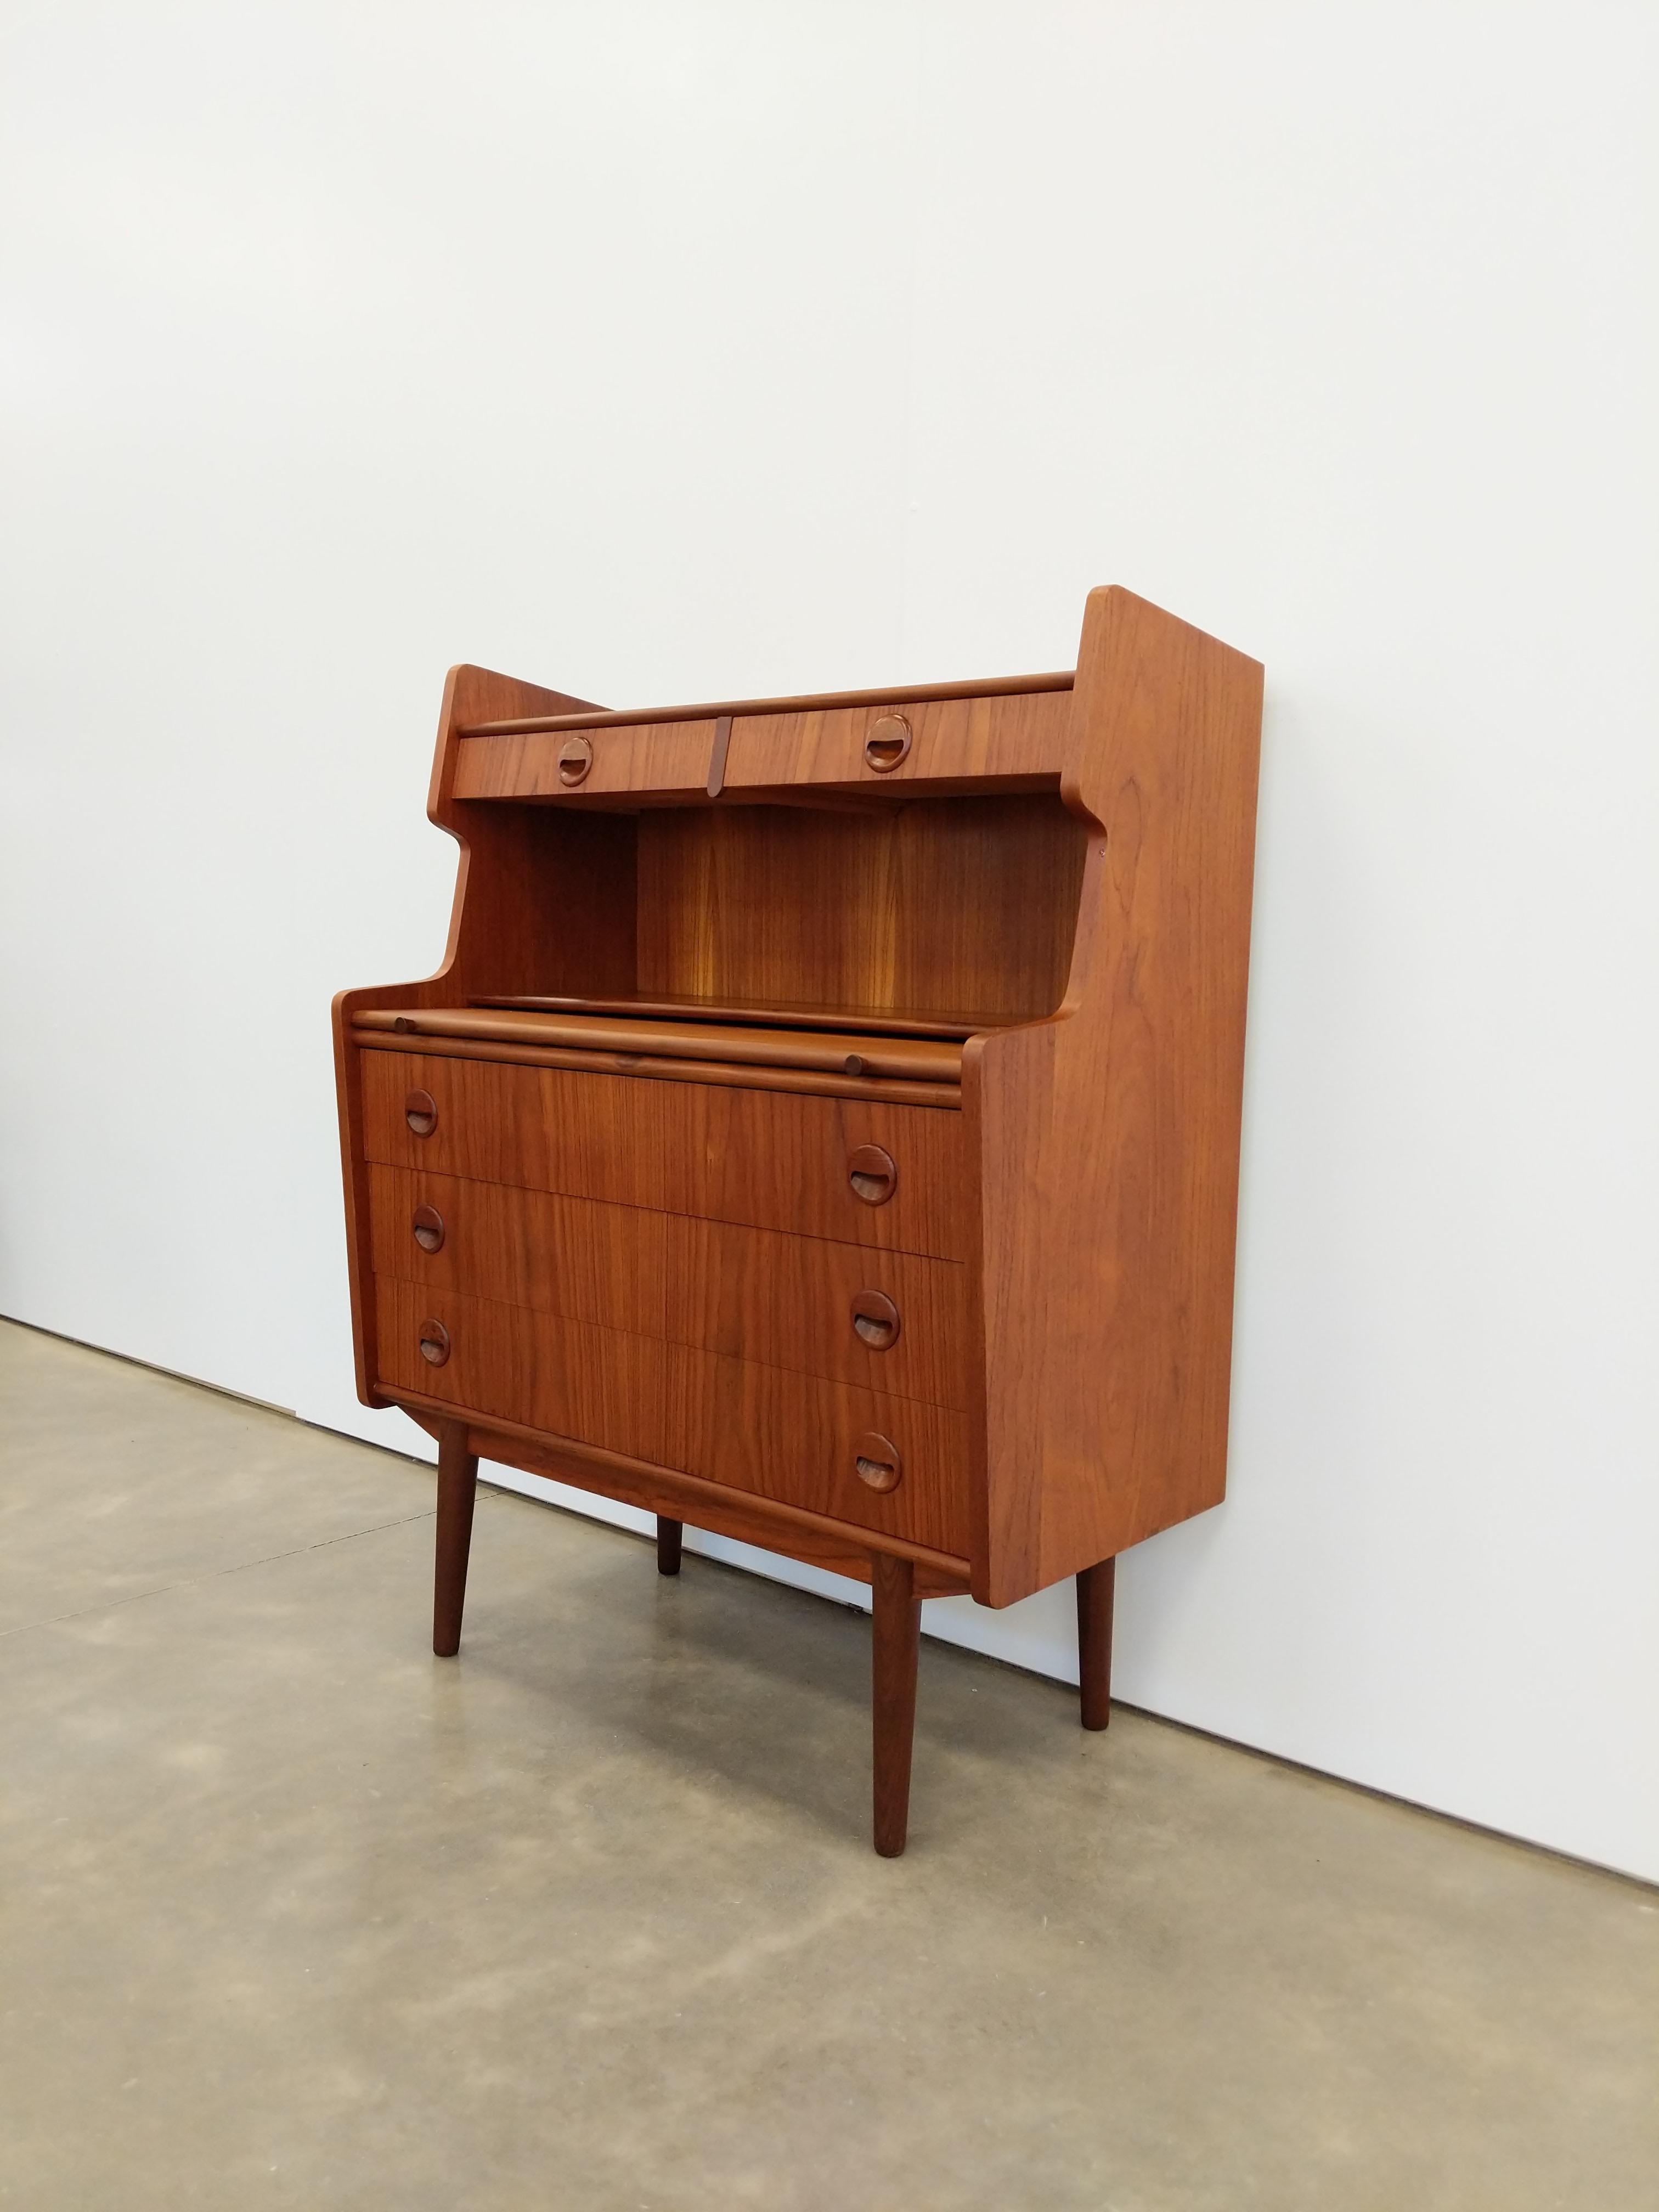 Authentic vintage mid century Danish / Scandinavian Modern teak secretary desk / dresser / chest of drawers.

This piece is in excellent refinished condition with very few signs of age-related wear (see photos).

If you would like any additional